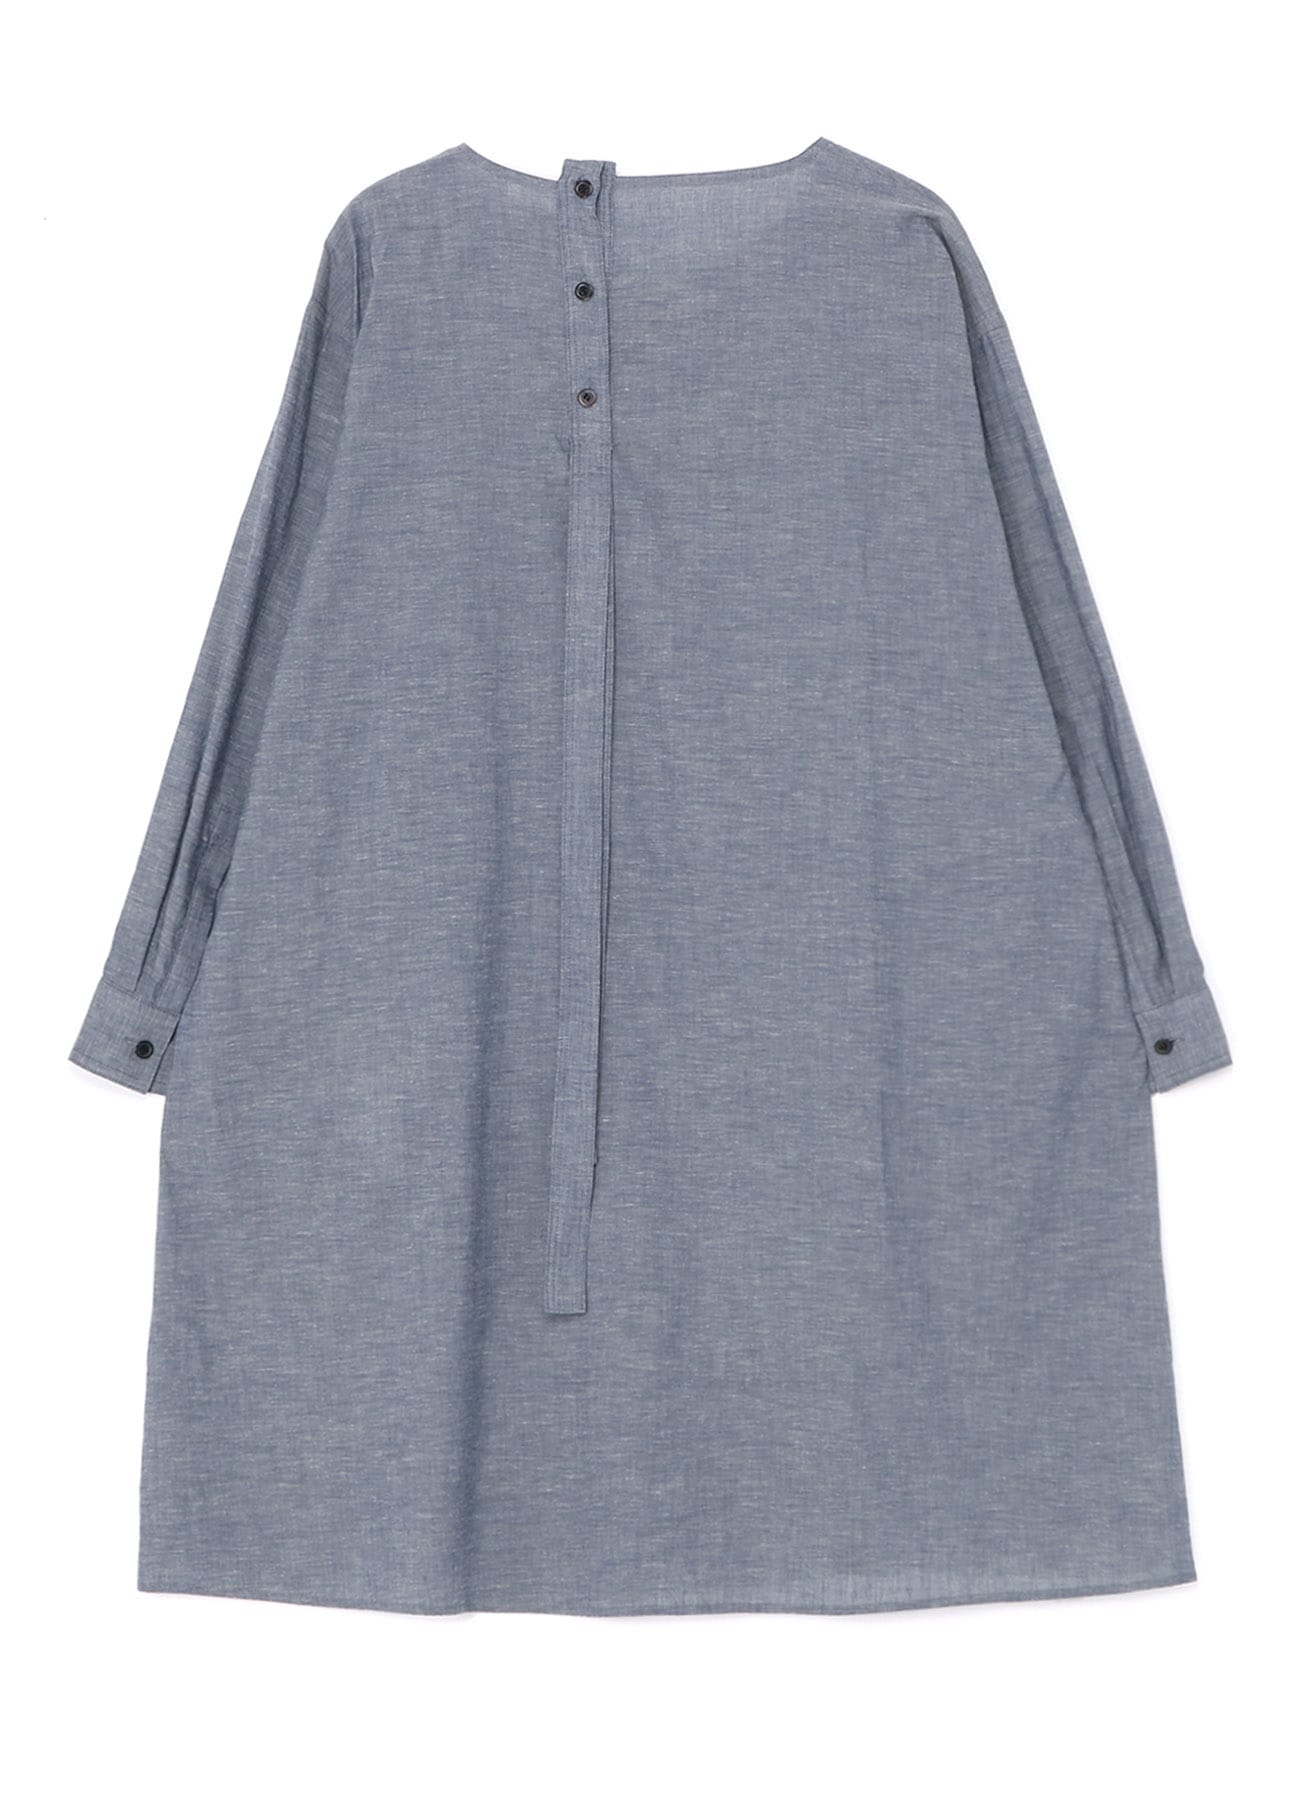 CHAMBRAY DECONSTRUCTED DRESS